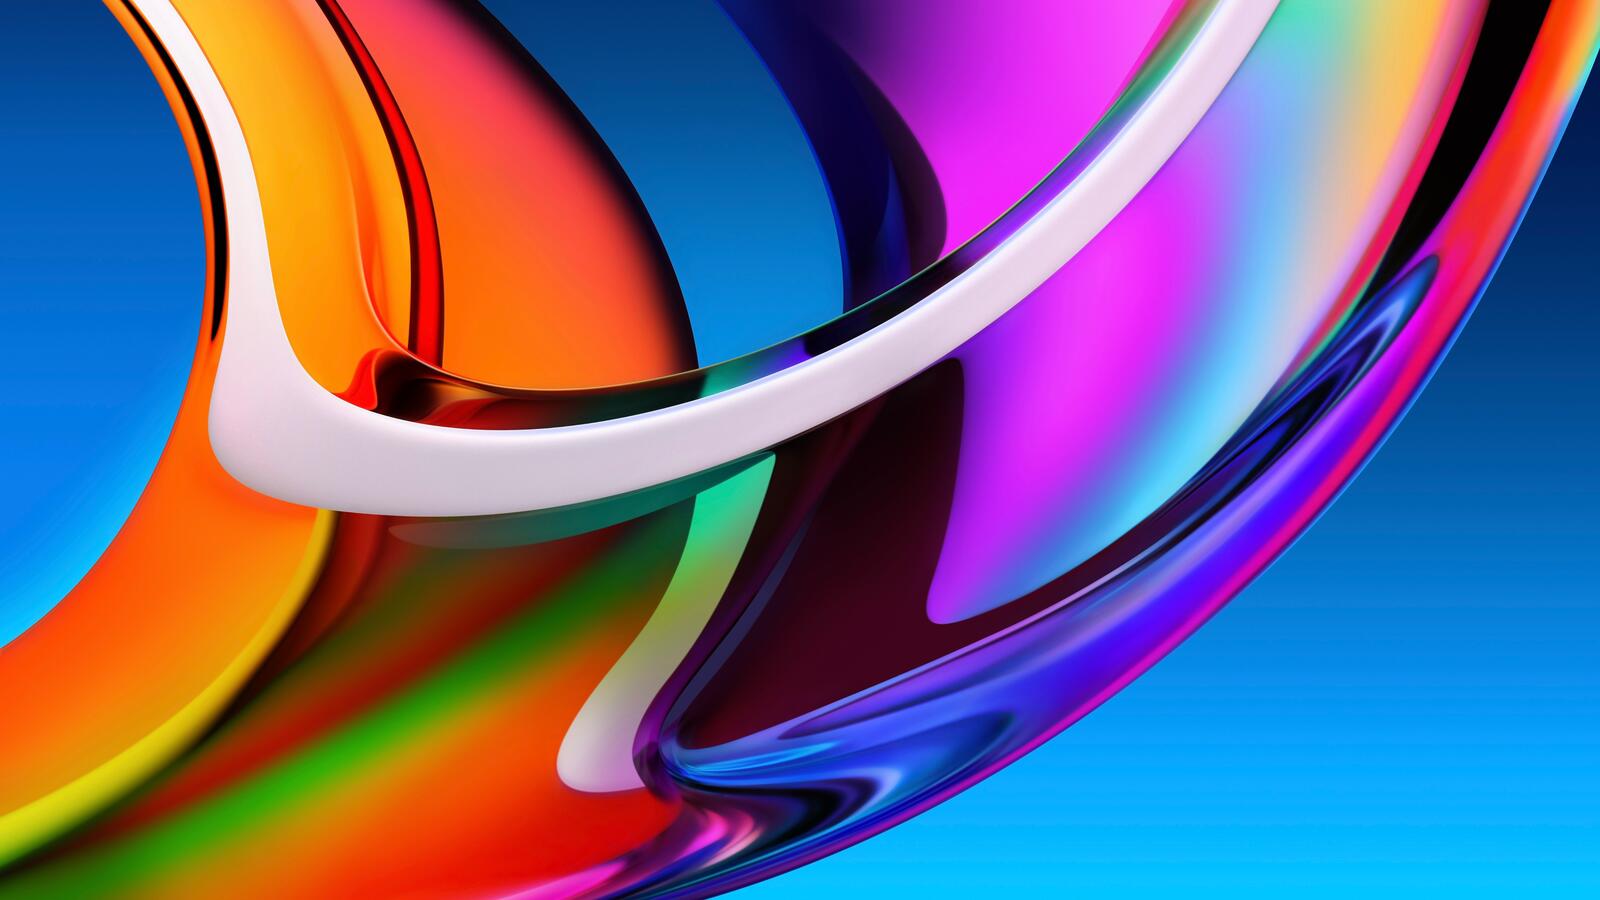 Wallpapers abstraction glass shiny wave on the desktop